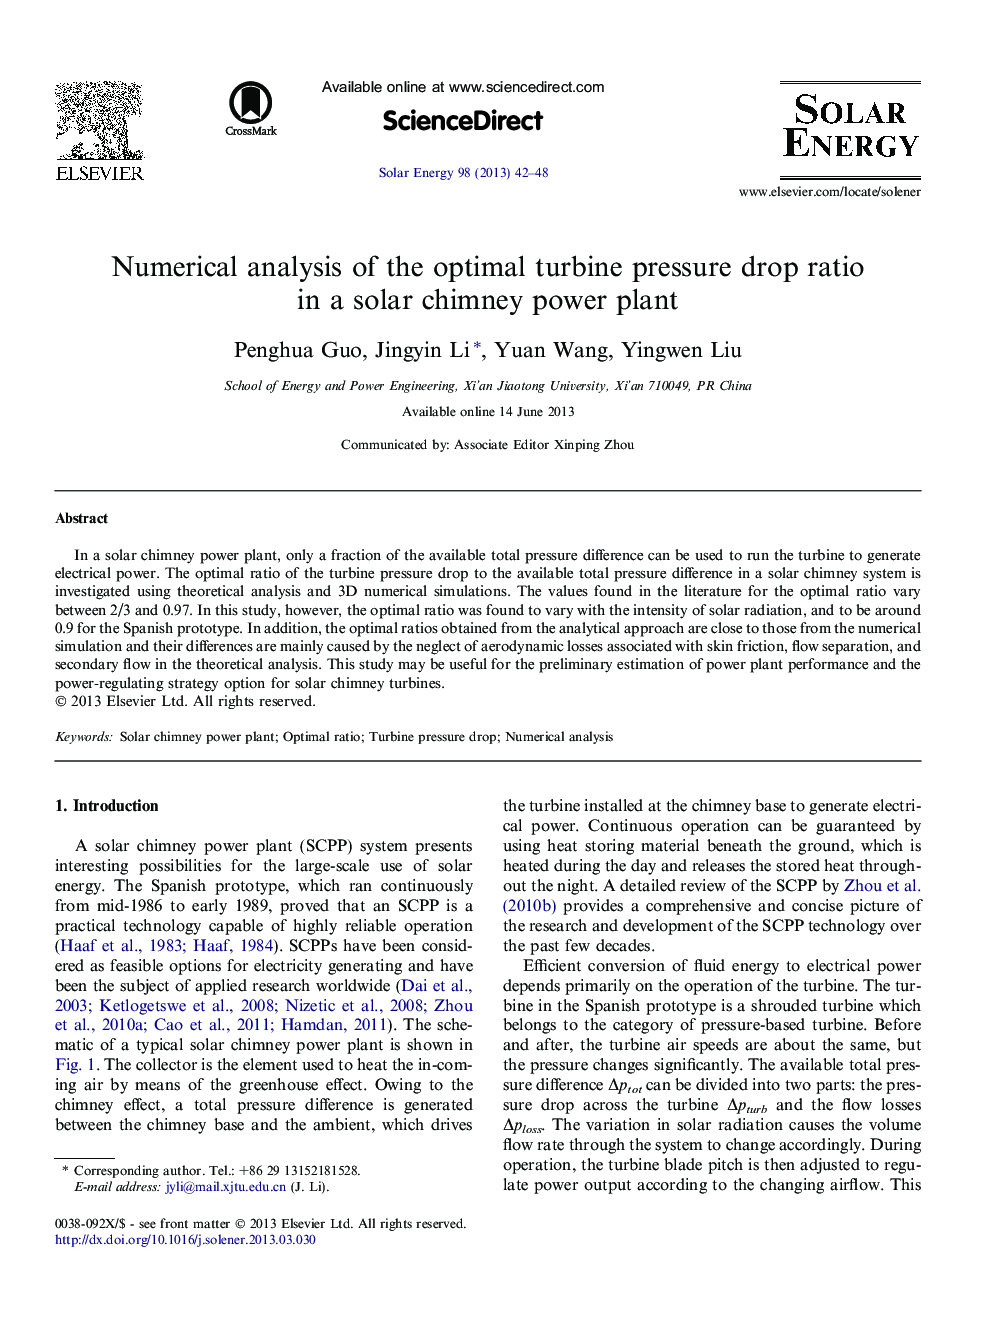 Numerical analysis of the optimal turbine pressure drop ratio in a solar chimney power plant